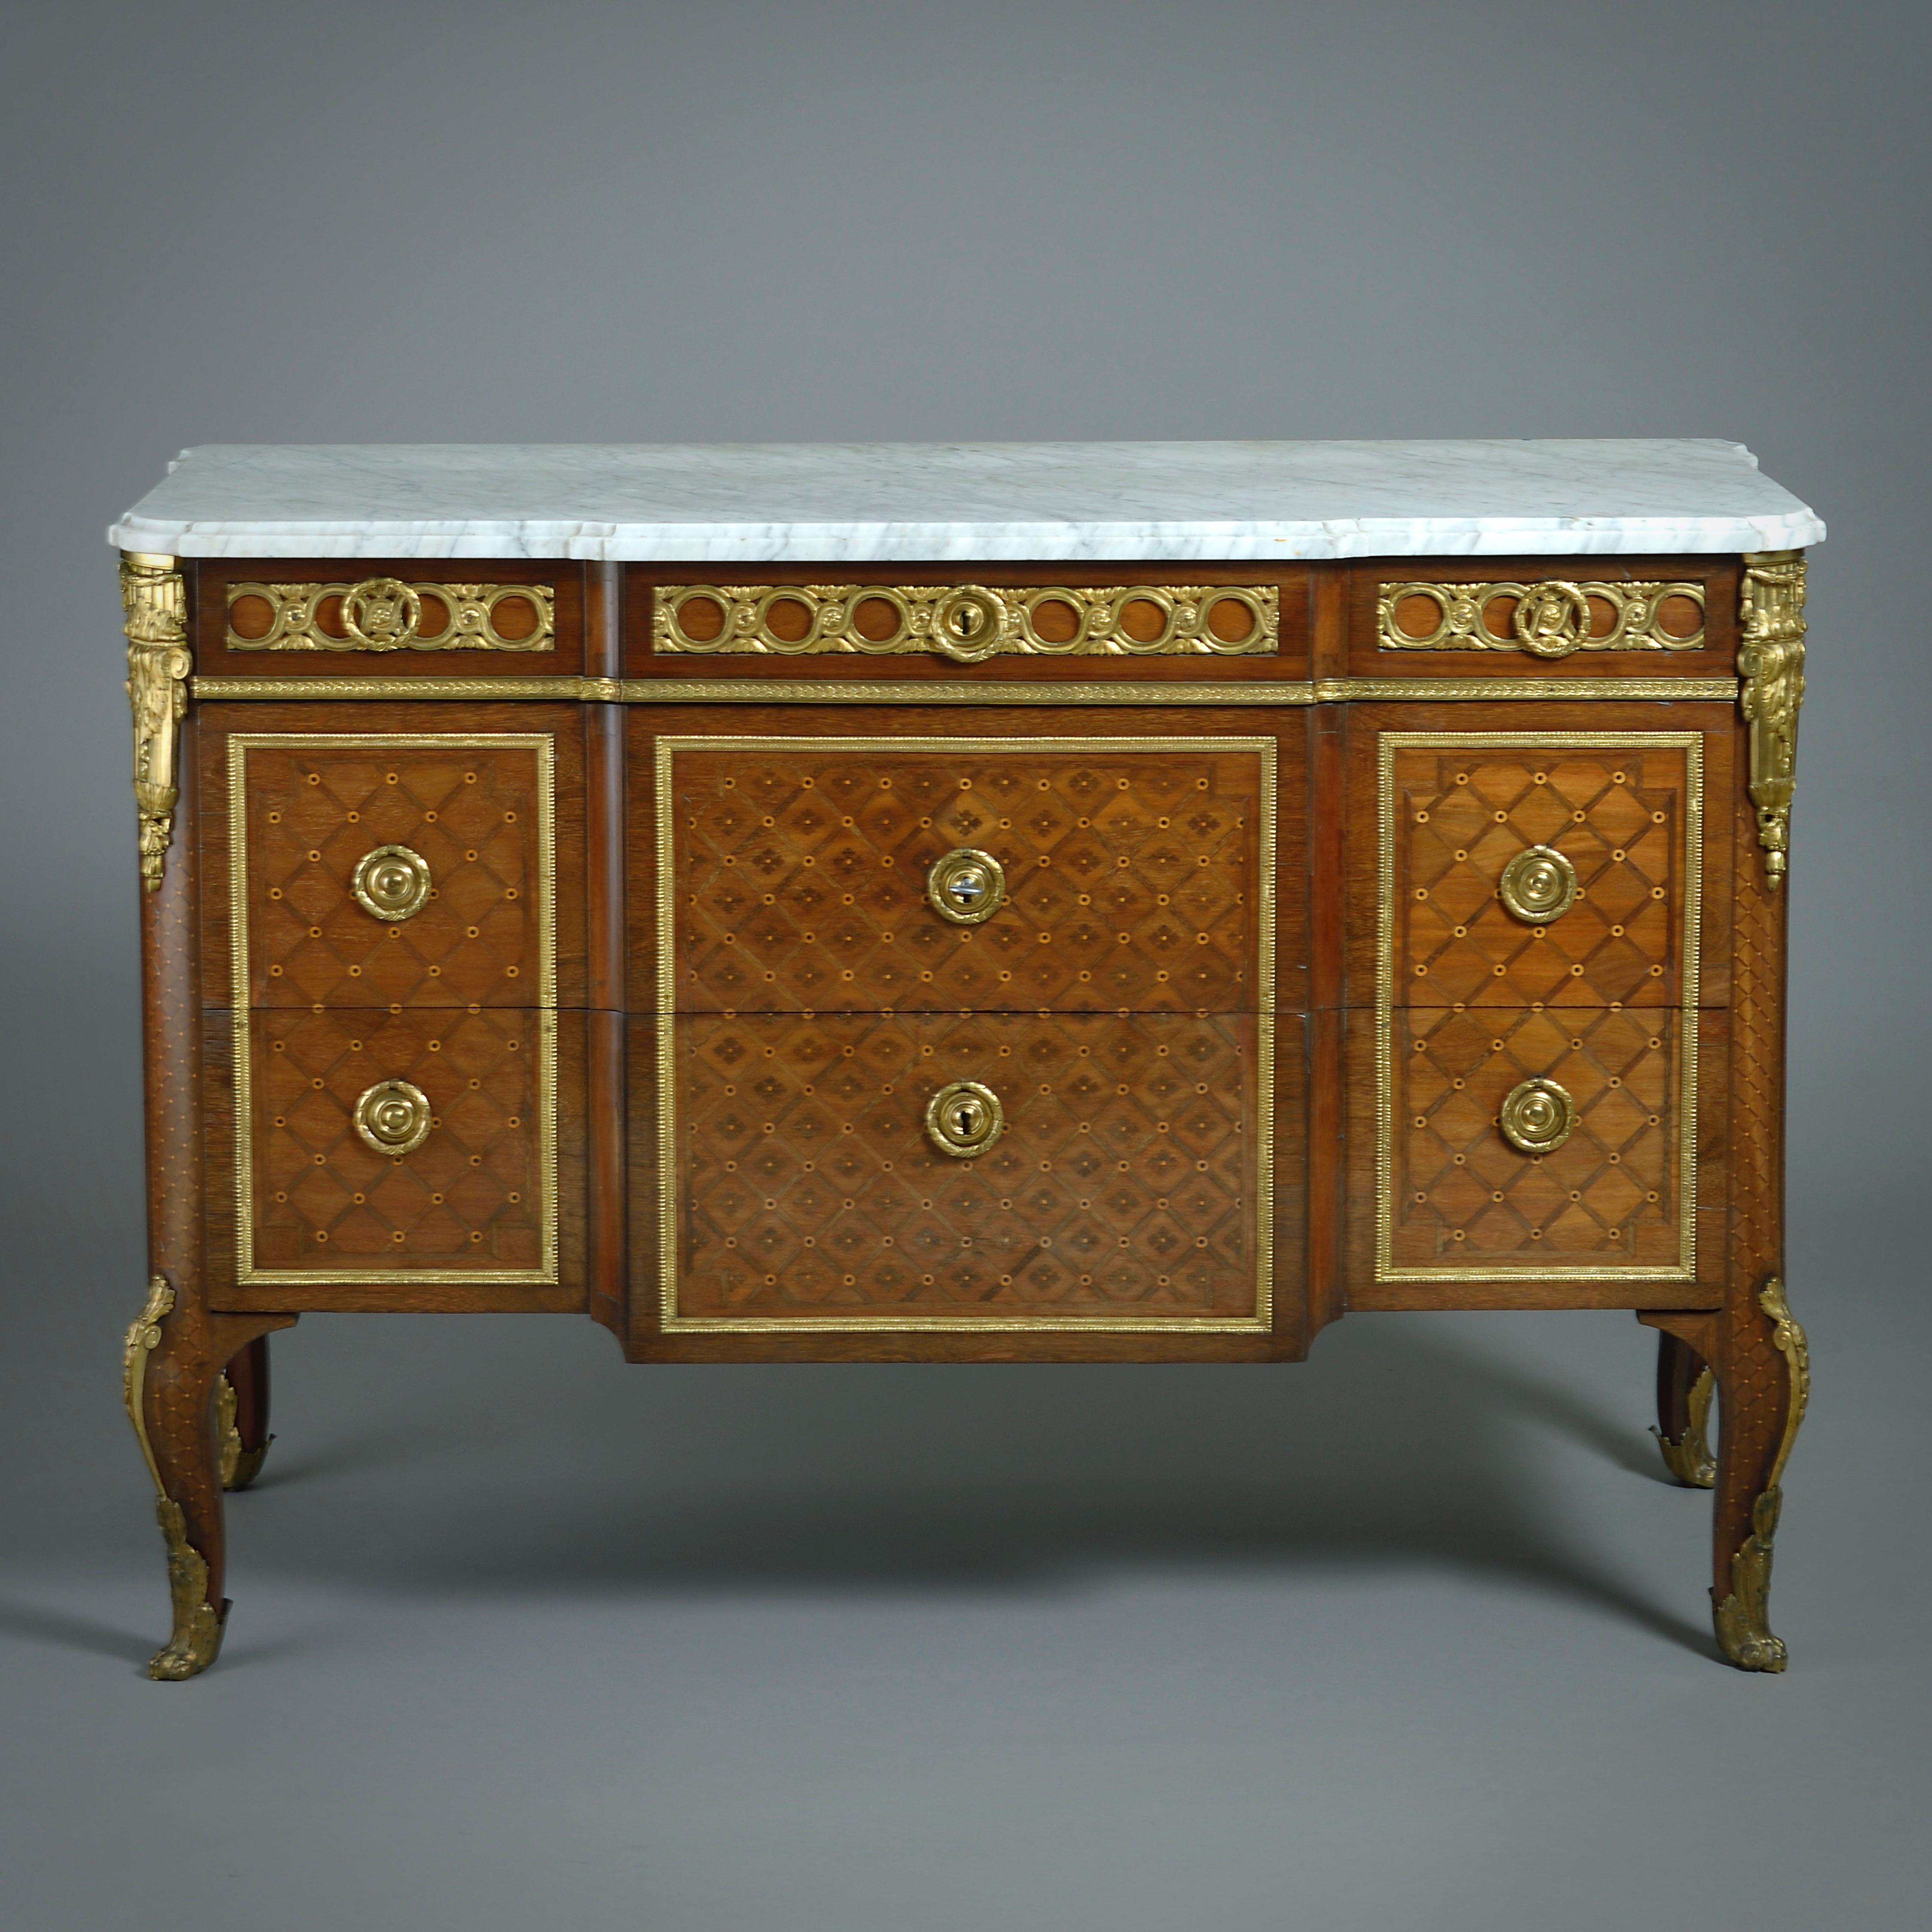 A MAGNIFICENT PAIR OF LATE LOUIS XV ORMOLU-MOUNTED PARQUETRY COMMODES PROBABLY SUPPLIED BY THE ÉBÉNISTE DU ROI GILLES JOUBERT (1689-1775), CIRCA 1770.
With minor variations, but almost certainly supplied as part of the same commission. Each with